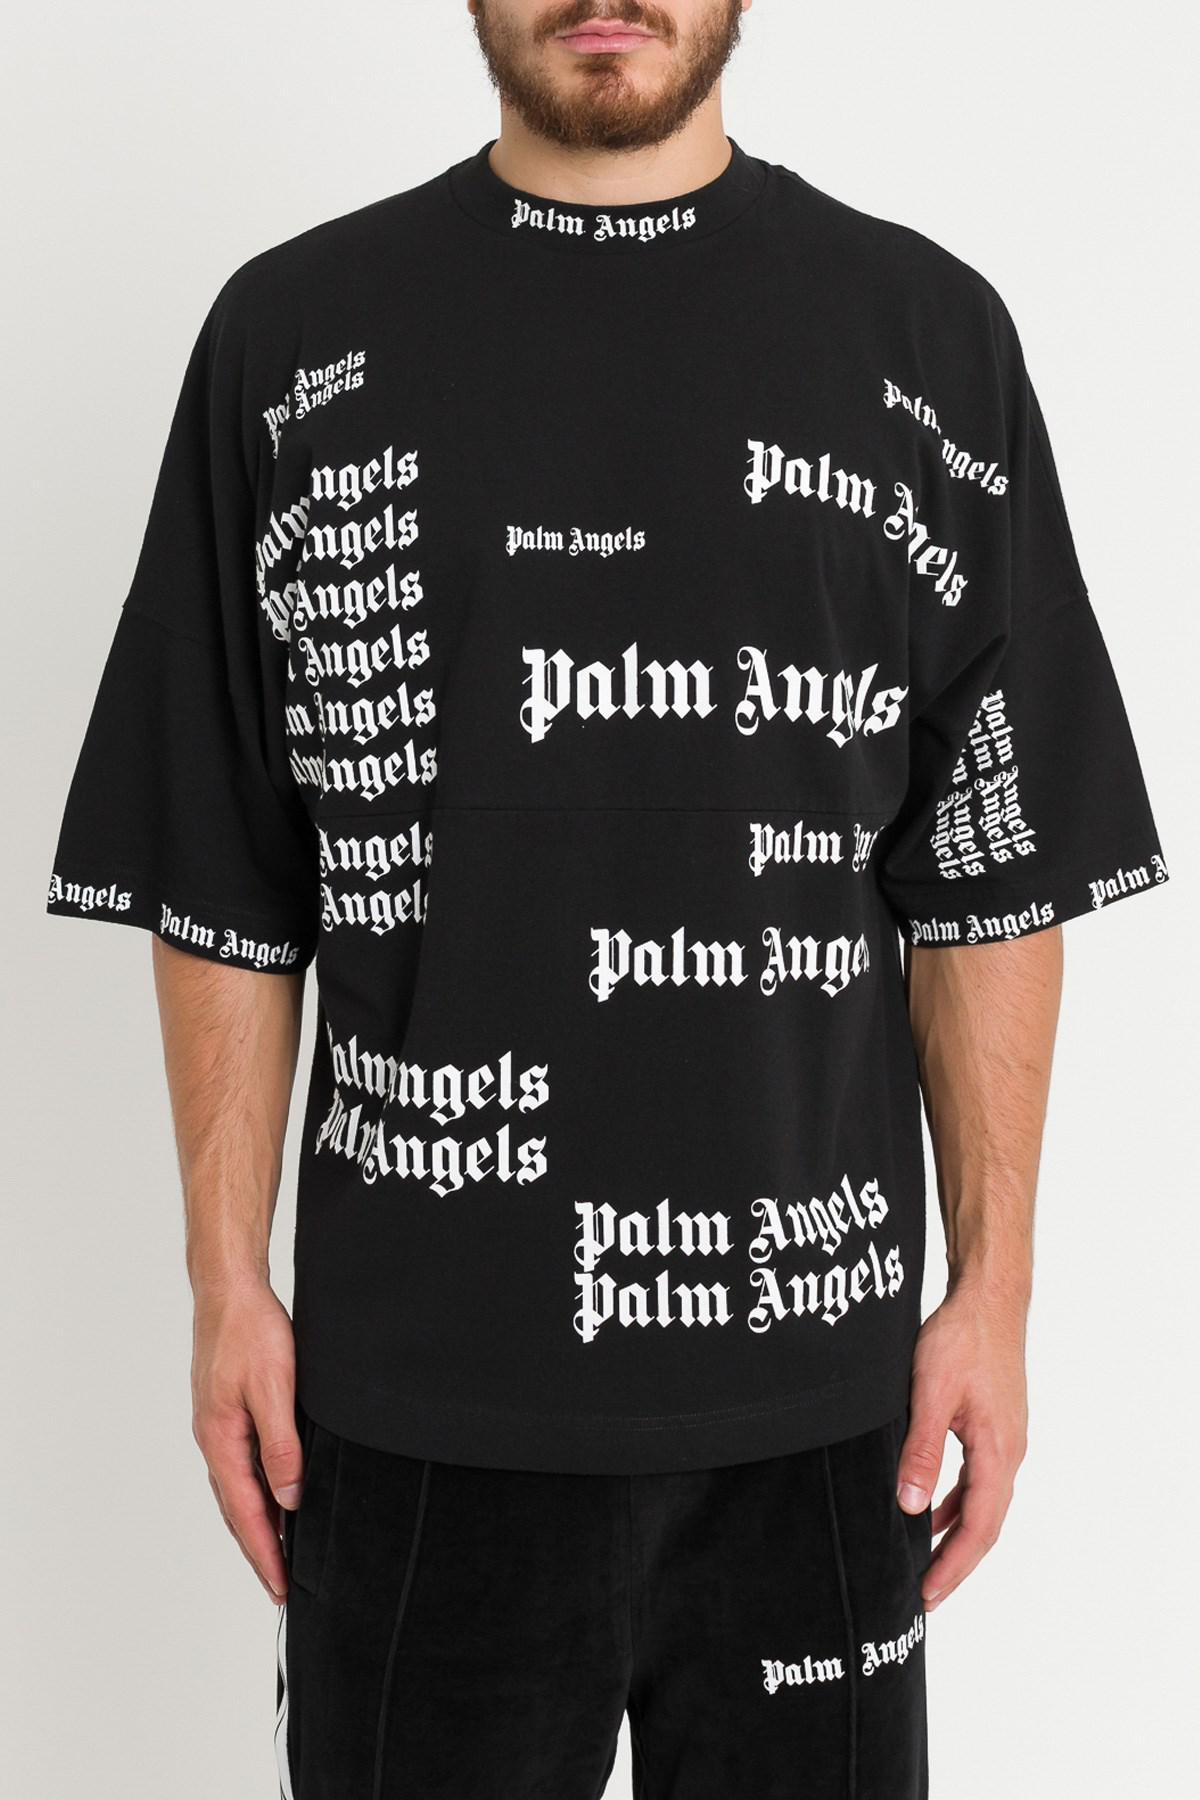 Palm Angels Cotton All-over Logo Tee in Black for Men - Lyst